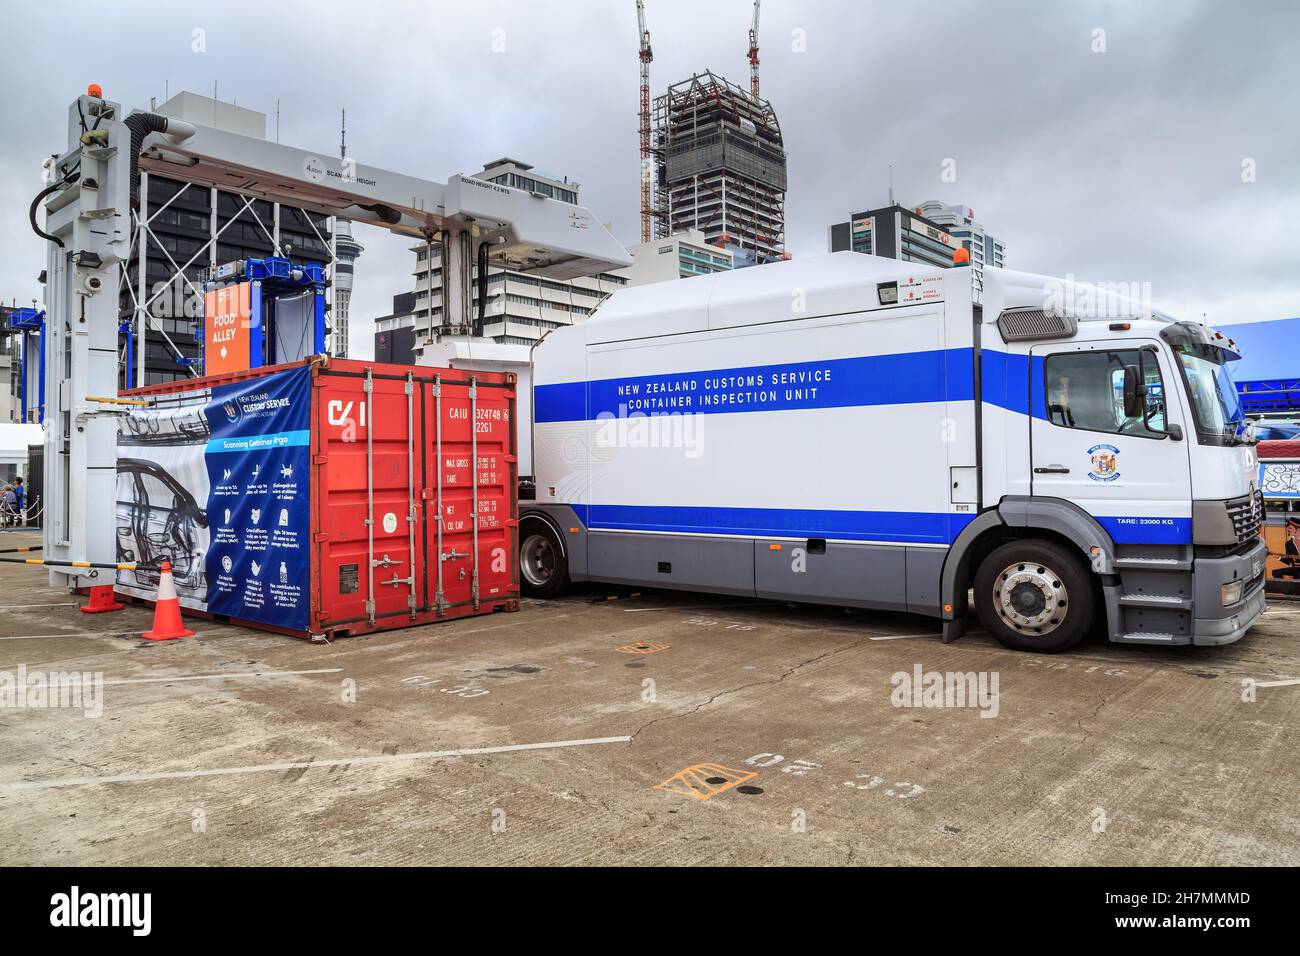 A New Zealand Customs Service container inspection vehicle on the Auckland waterfront Stock Photo